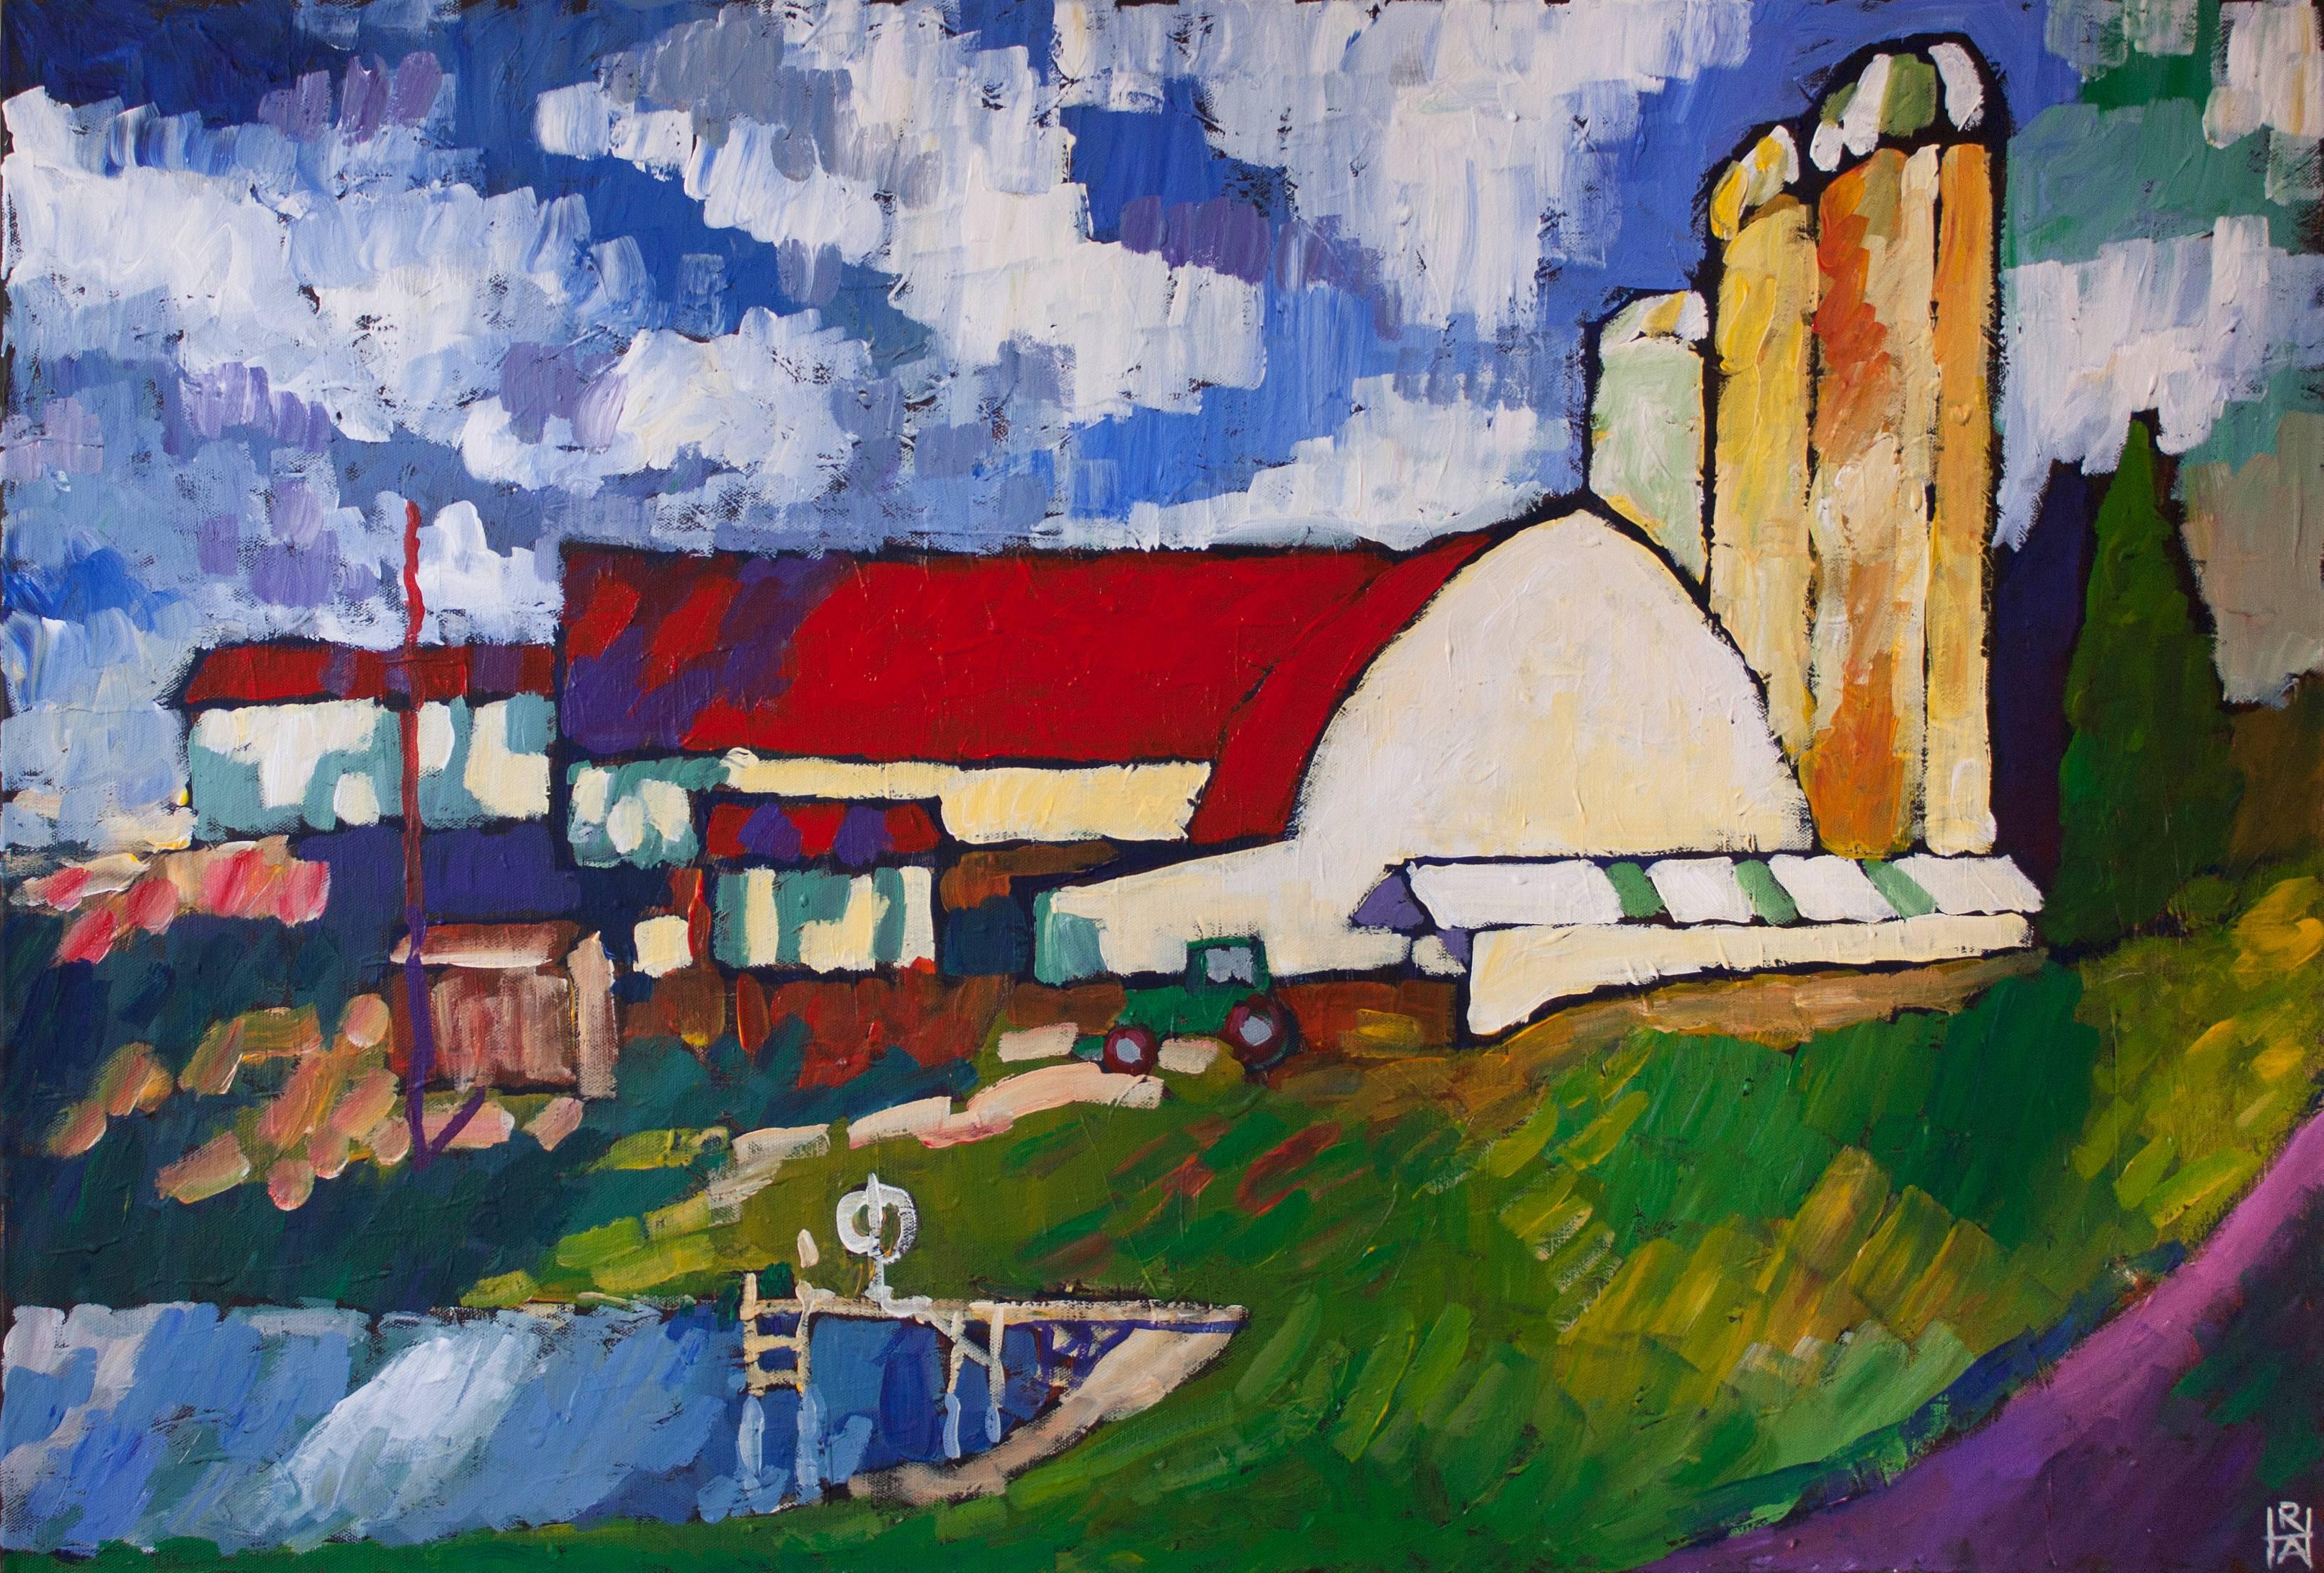 Brogue Robert Hofherr Acrylic painting on stretched canvas
Finished edges
Ready to hang
One-of-a-kind
Signed on front
2018
24 in. h x 36 in. w x 1.37 in. d
3 lbs. 8 oz. Artist Comments 
I have passed this farm many times, and this image derives from